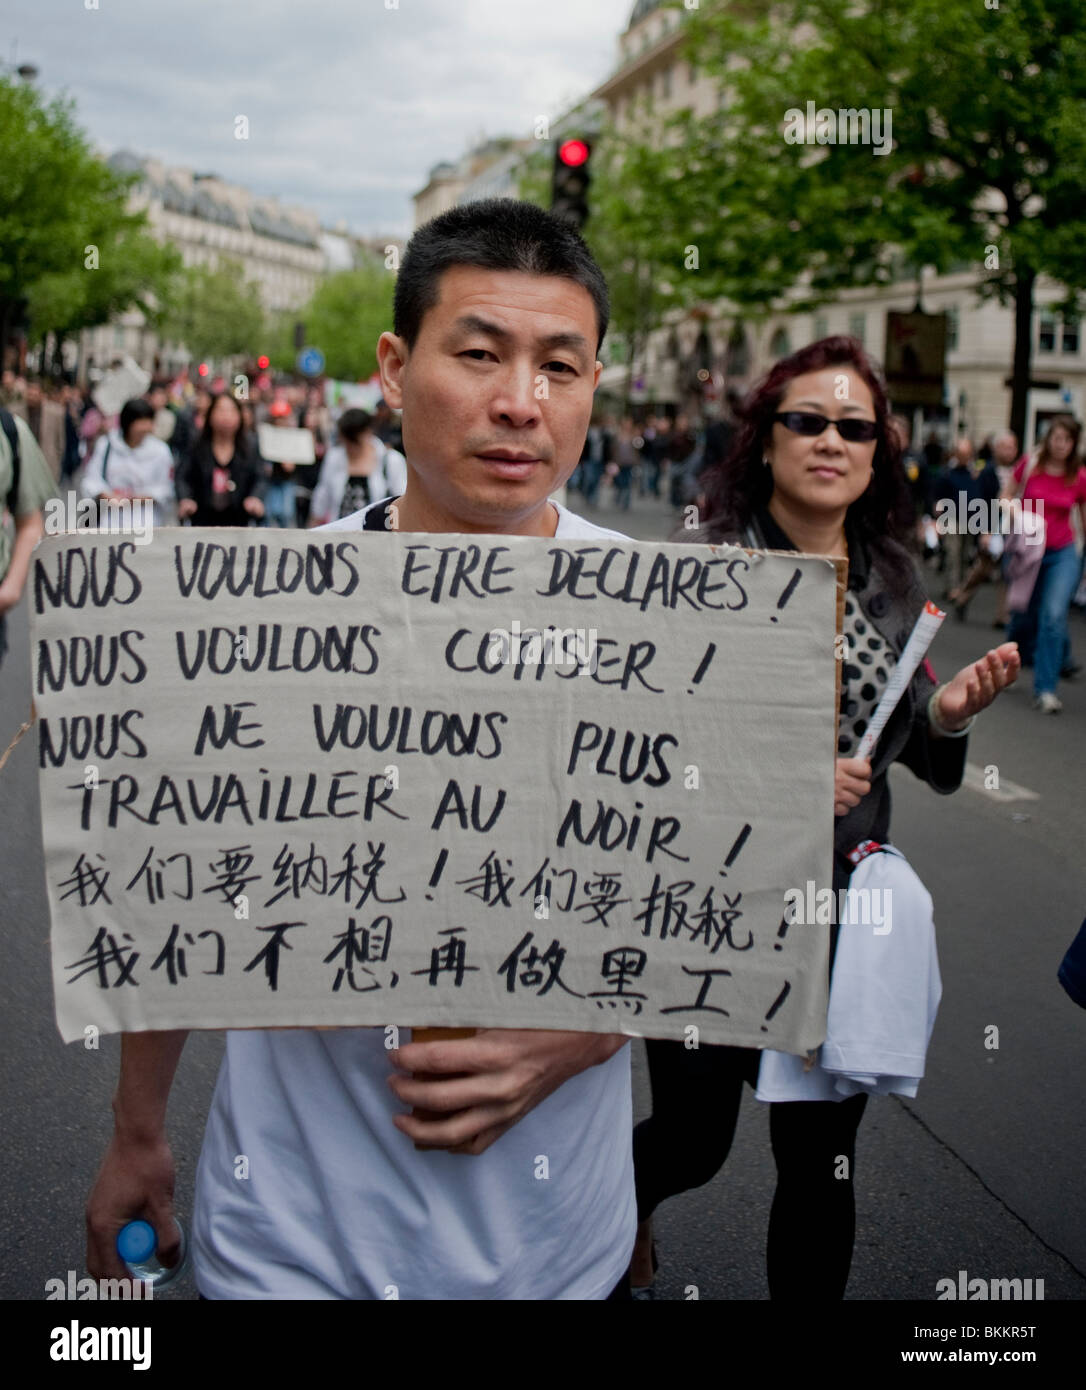 Chinese People Demonstrating in May 1, May Day Demonstration, Paris, France, Portrait, Man Holding Bi-Lingual Protest Sign in Mandarin "Sans papiers" labour workers rights protests, immigrants rights, peaceful protest sign, illegal migrants Euorpe Stock Photo